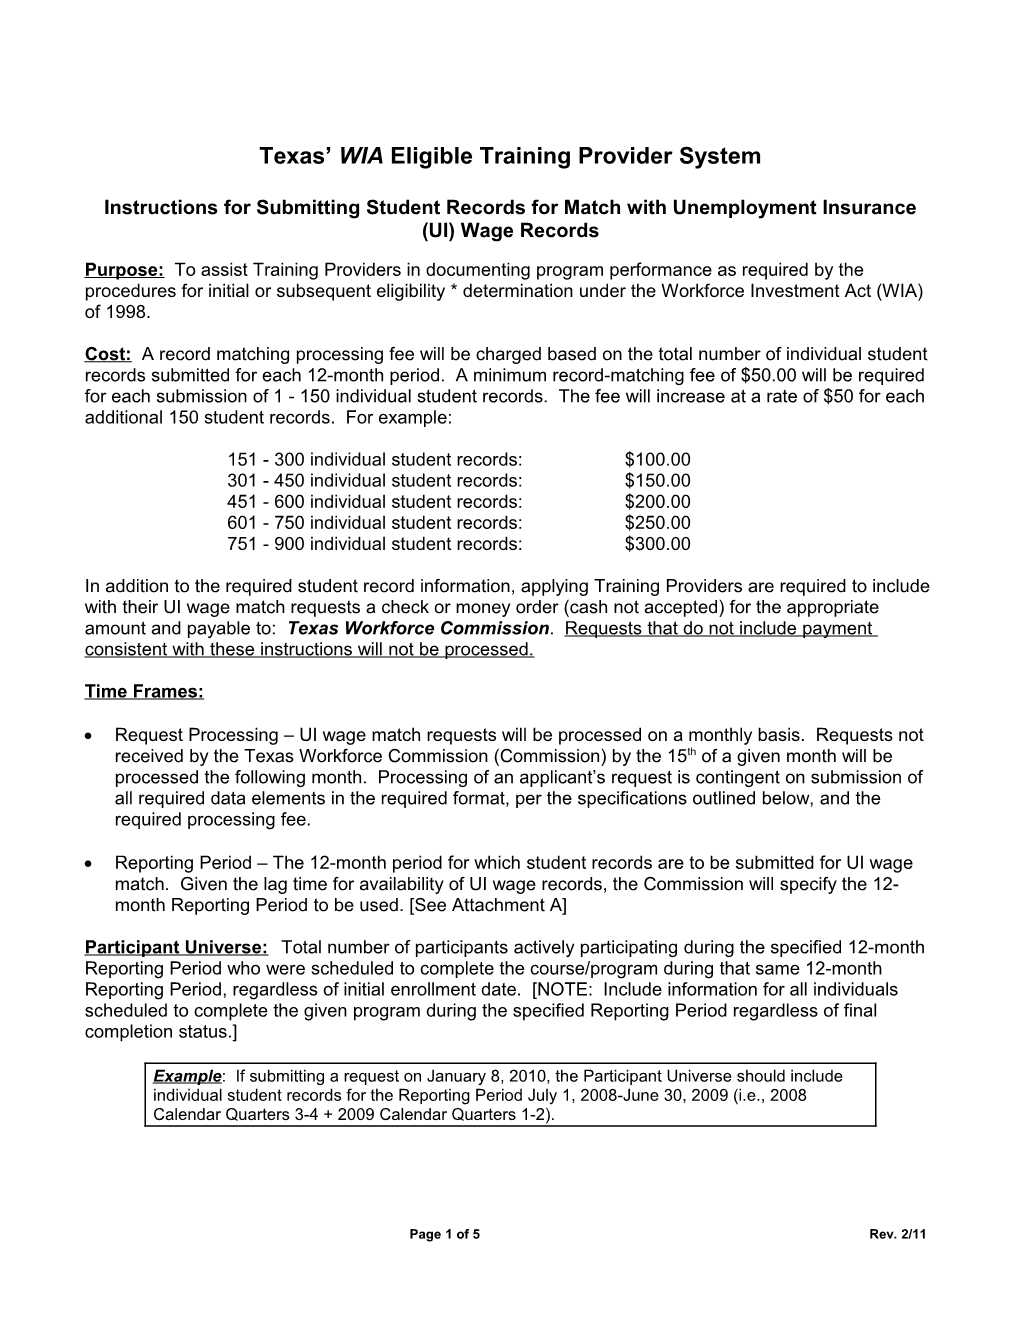 Texas' WIA Training Provider Certification System: Instructions for Submitting Student